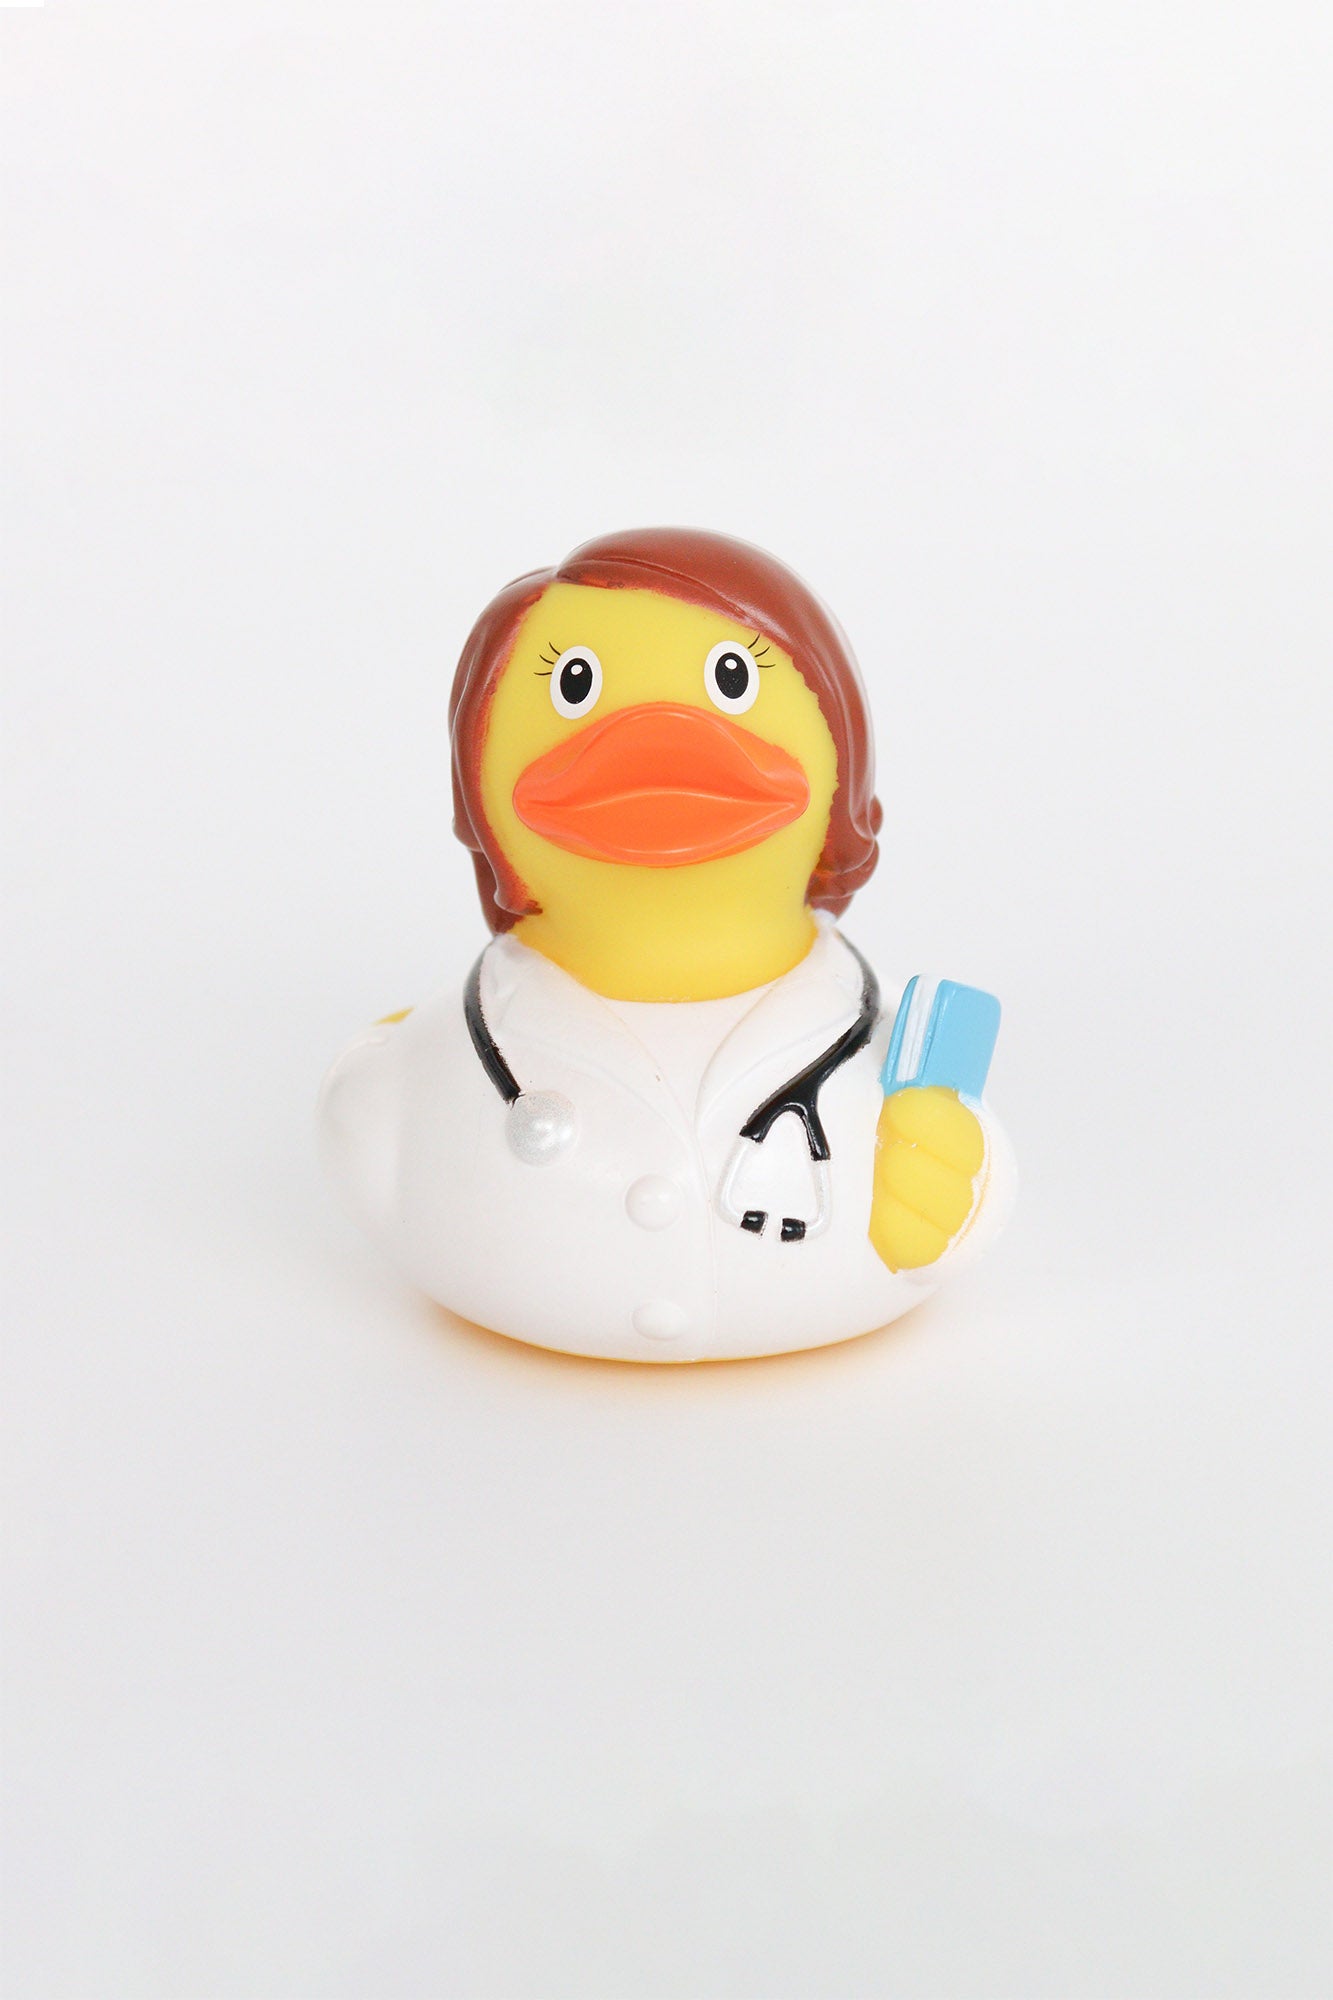 Female doctor plastic duck toy